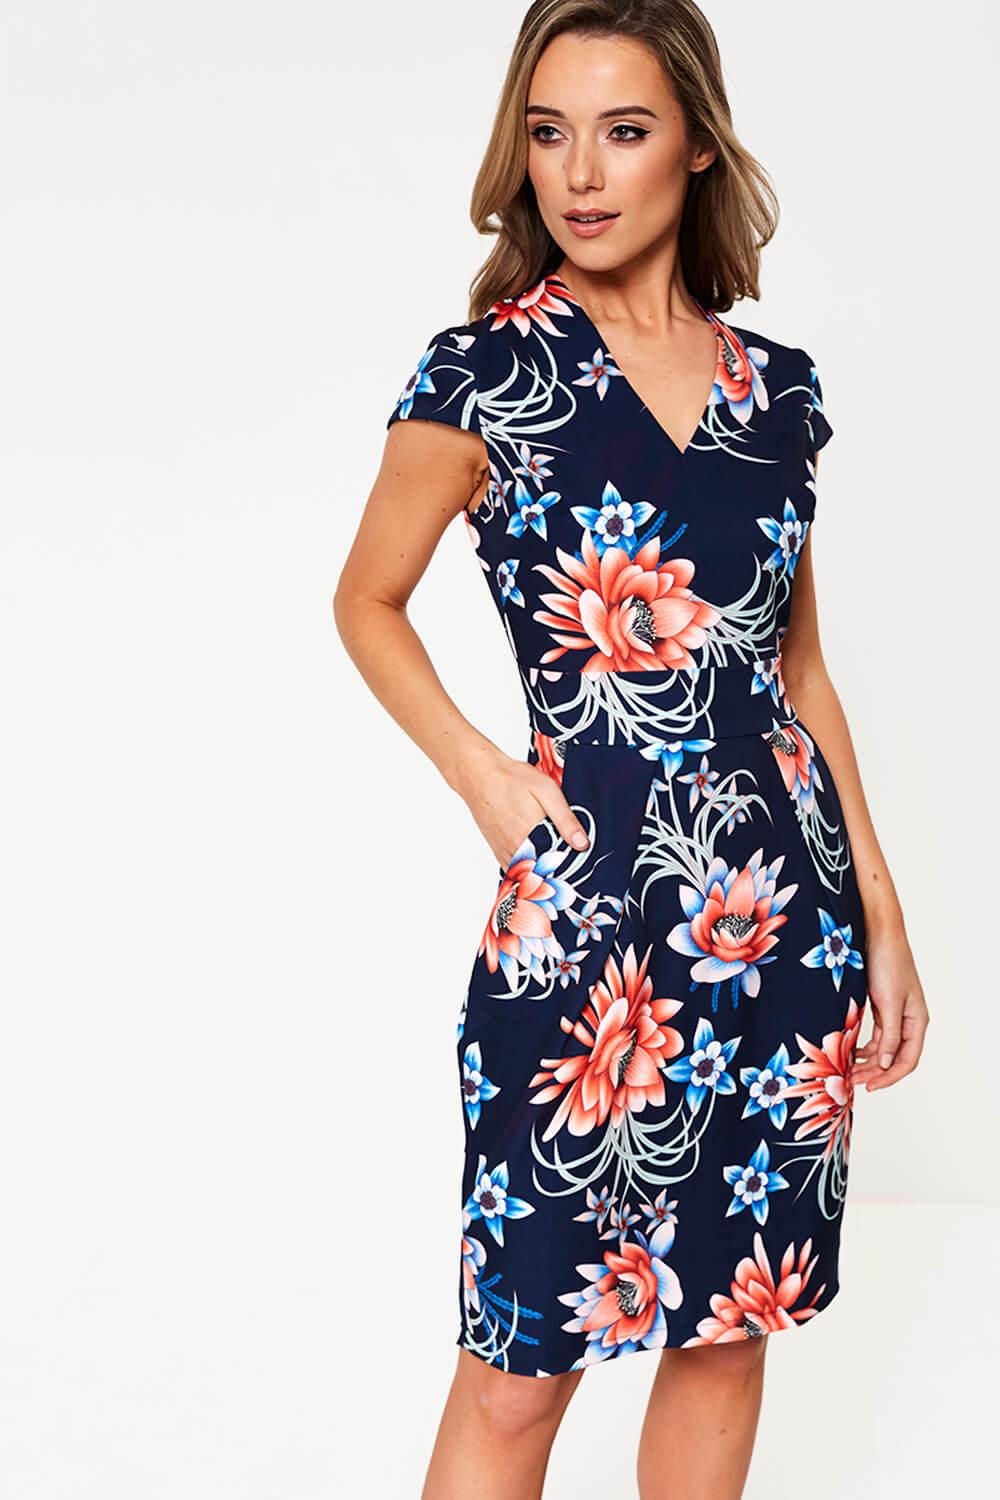 Marc Angelo Onyx Floral Print Belted Dress in Navy | iCLOTHING - iCLOTHING